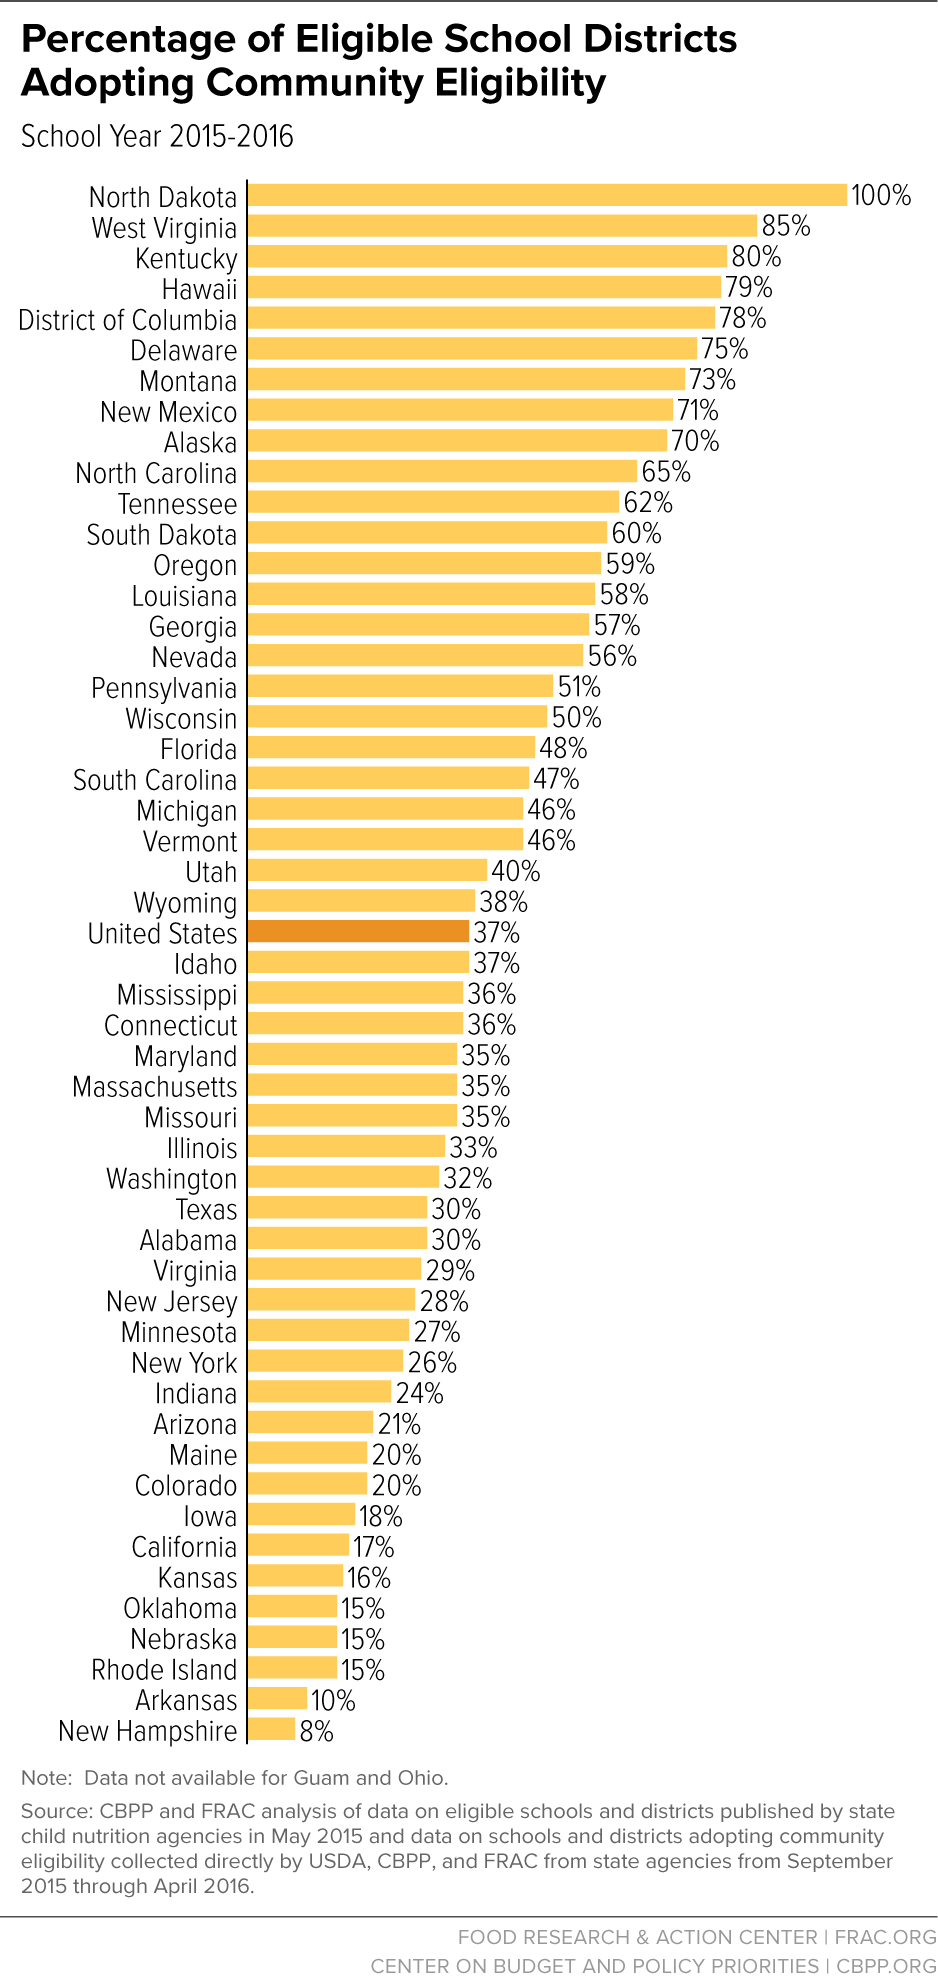 Percentage of Eligible School Districts Adopting Community Eligibility